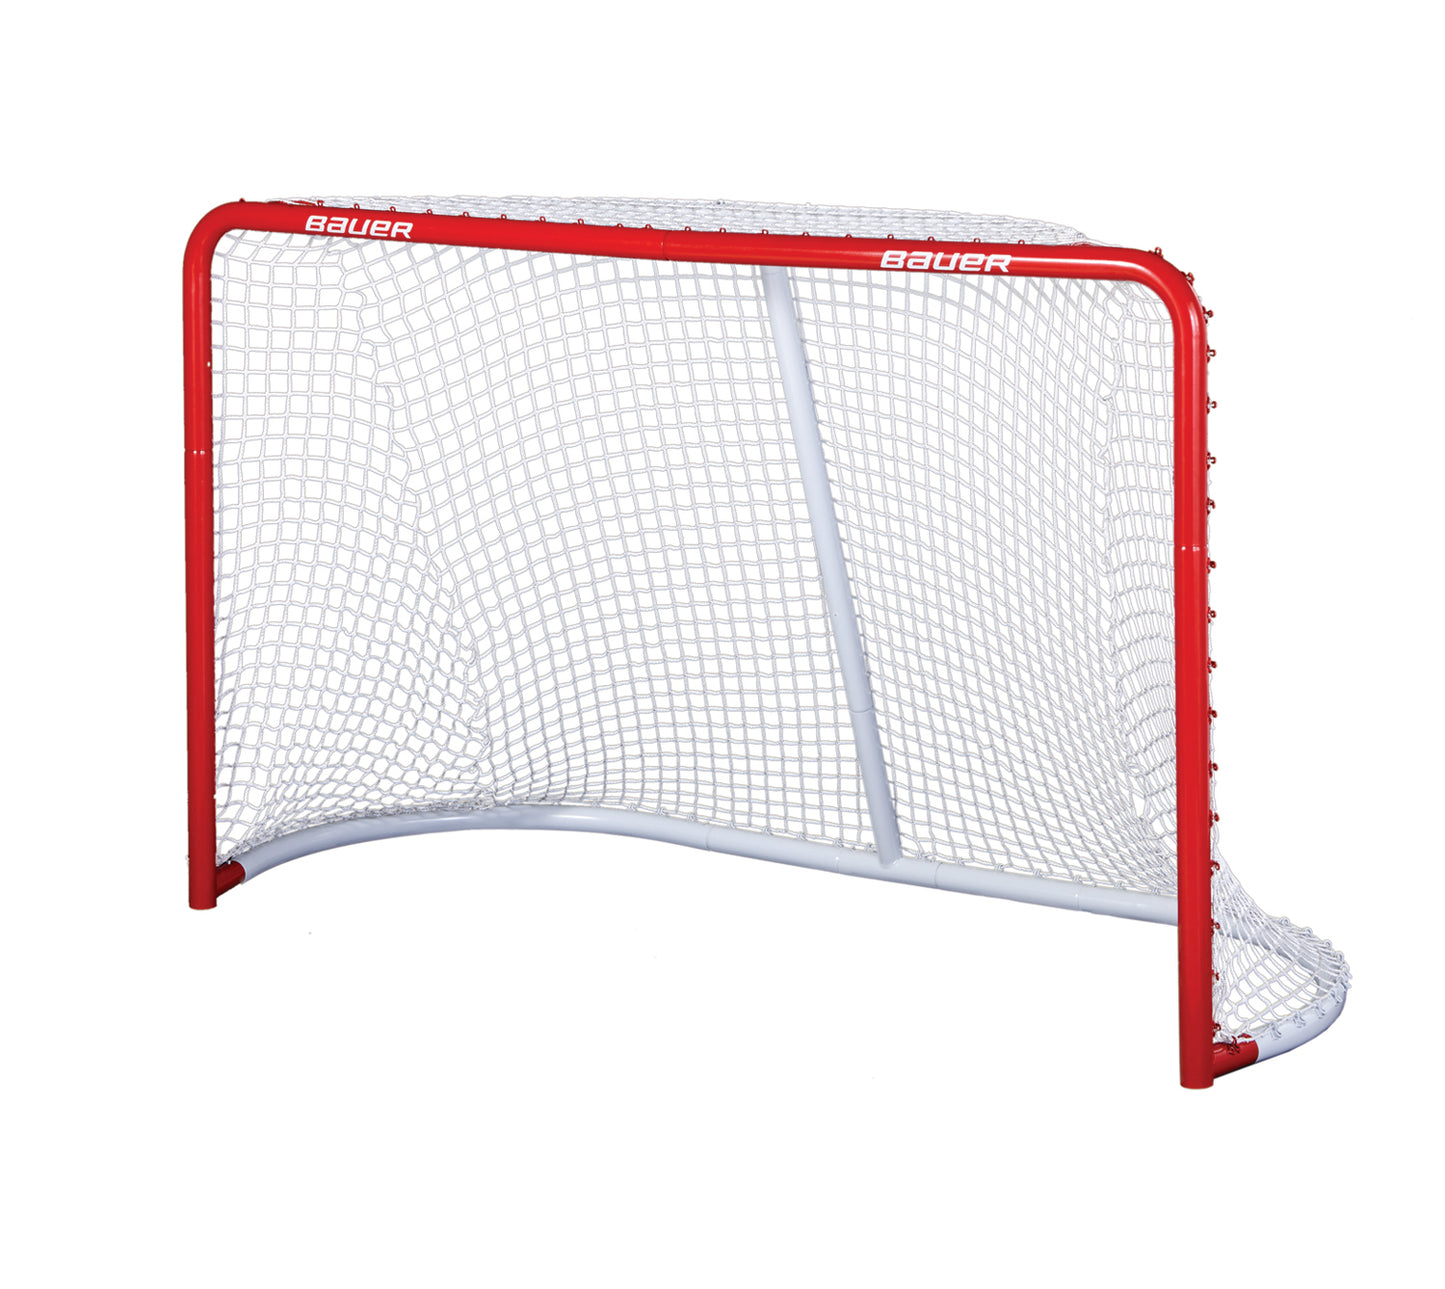 OFFICIAL PERFORMANCE STEEL GOAL